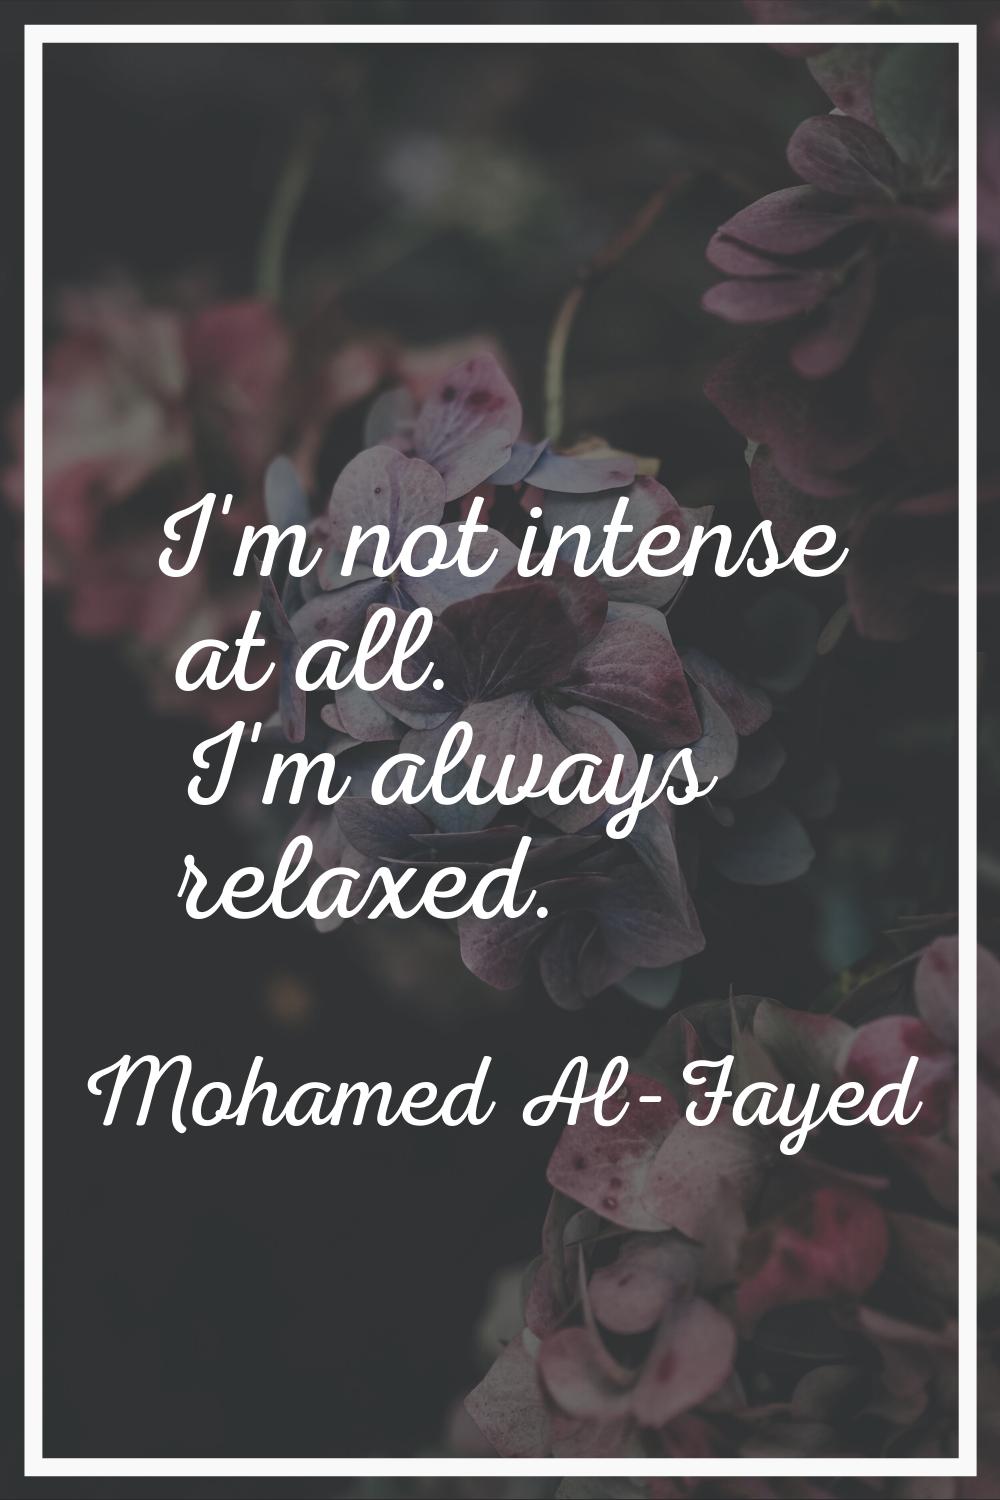 I'm not intense at all. I'm always relaxed.